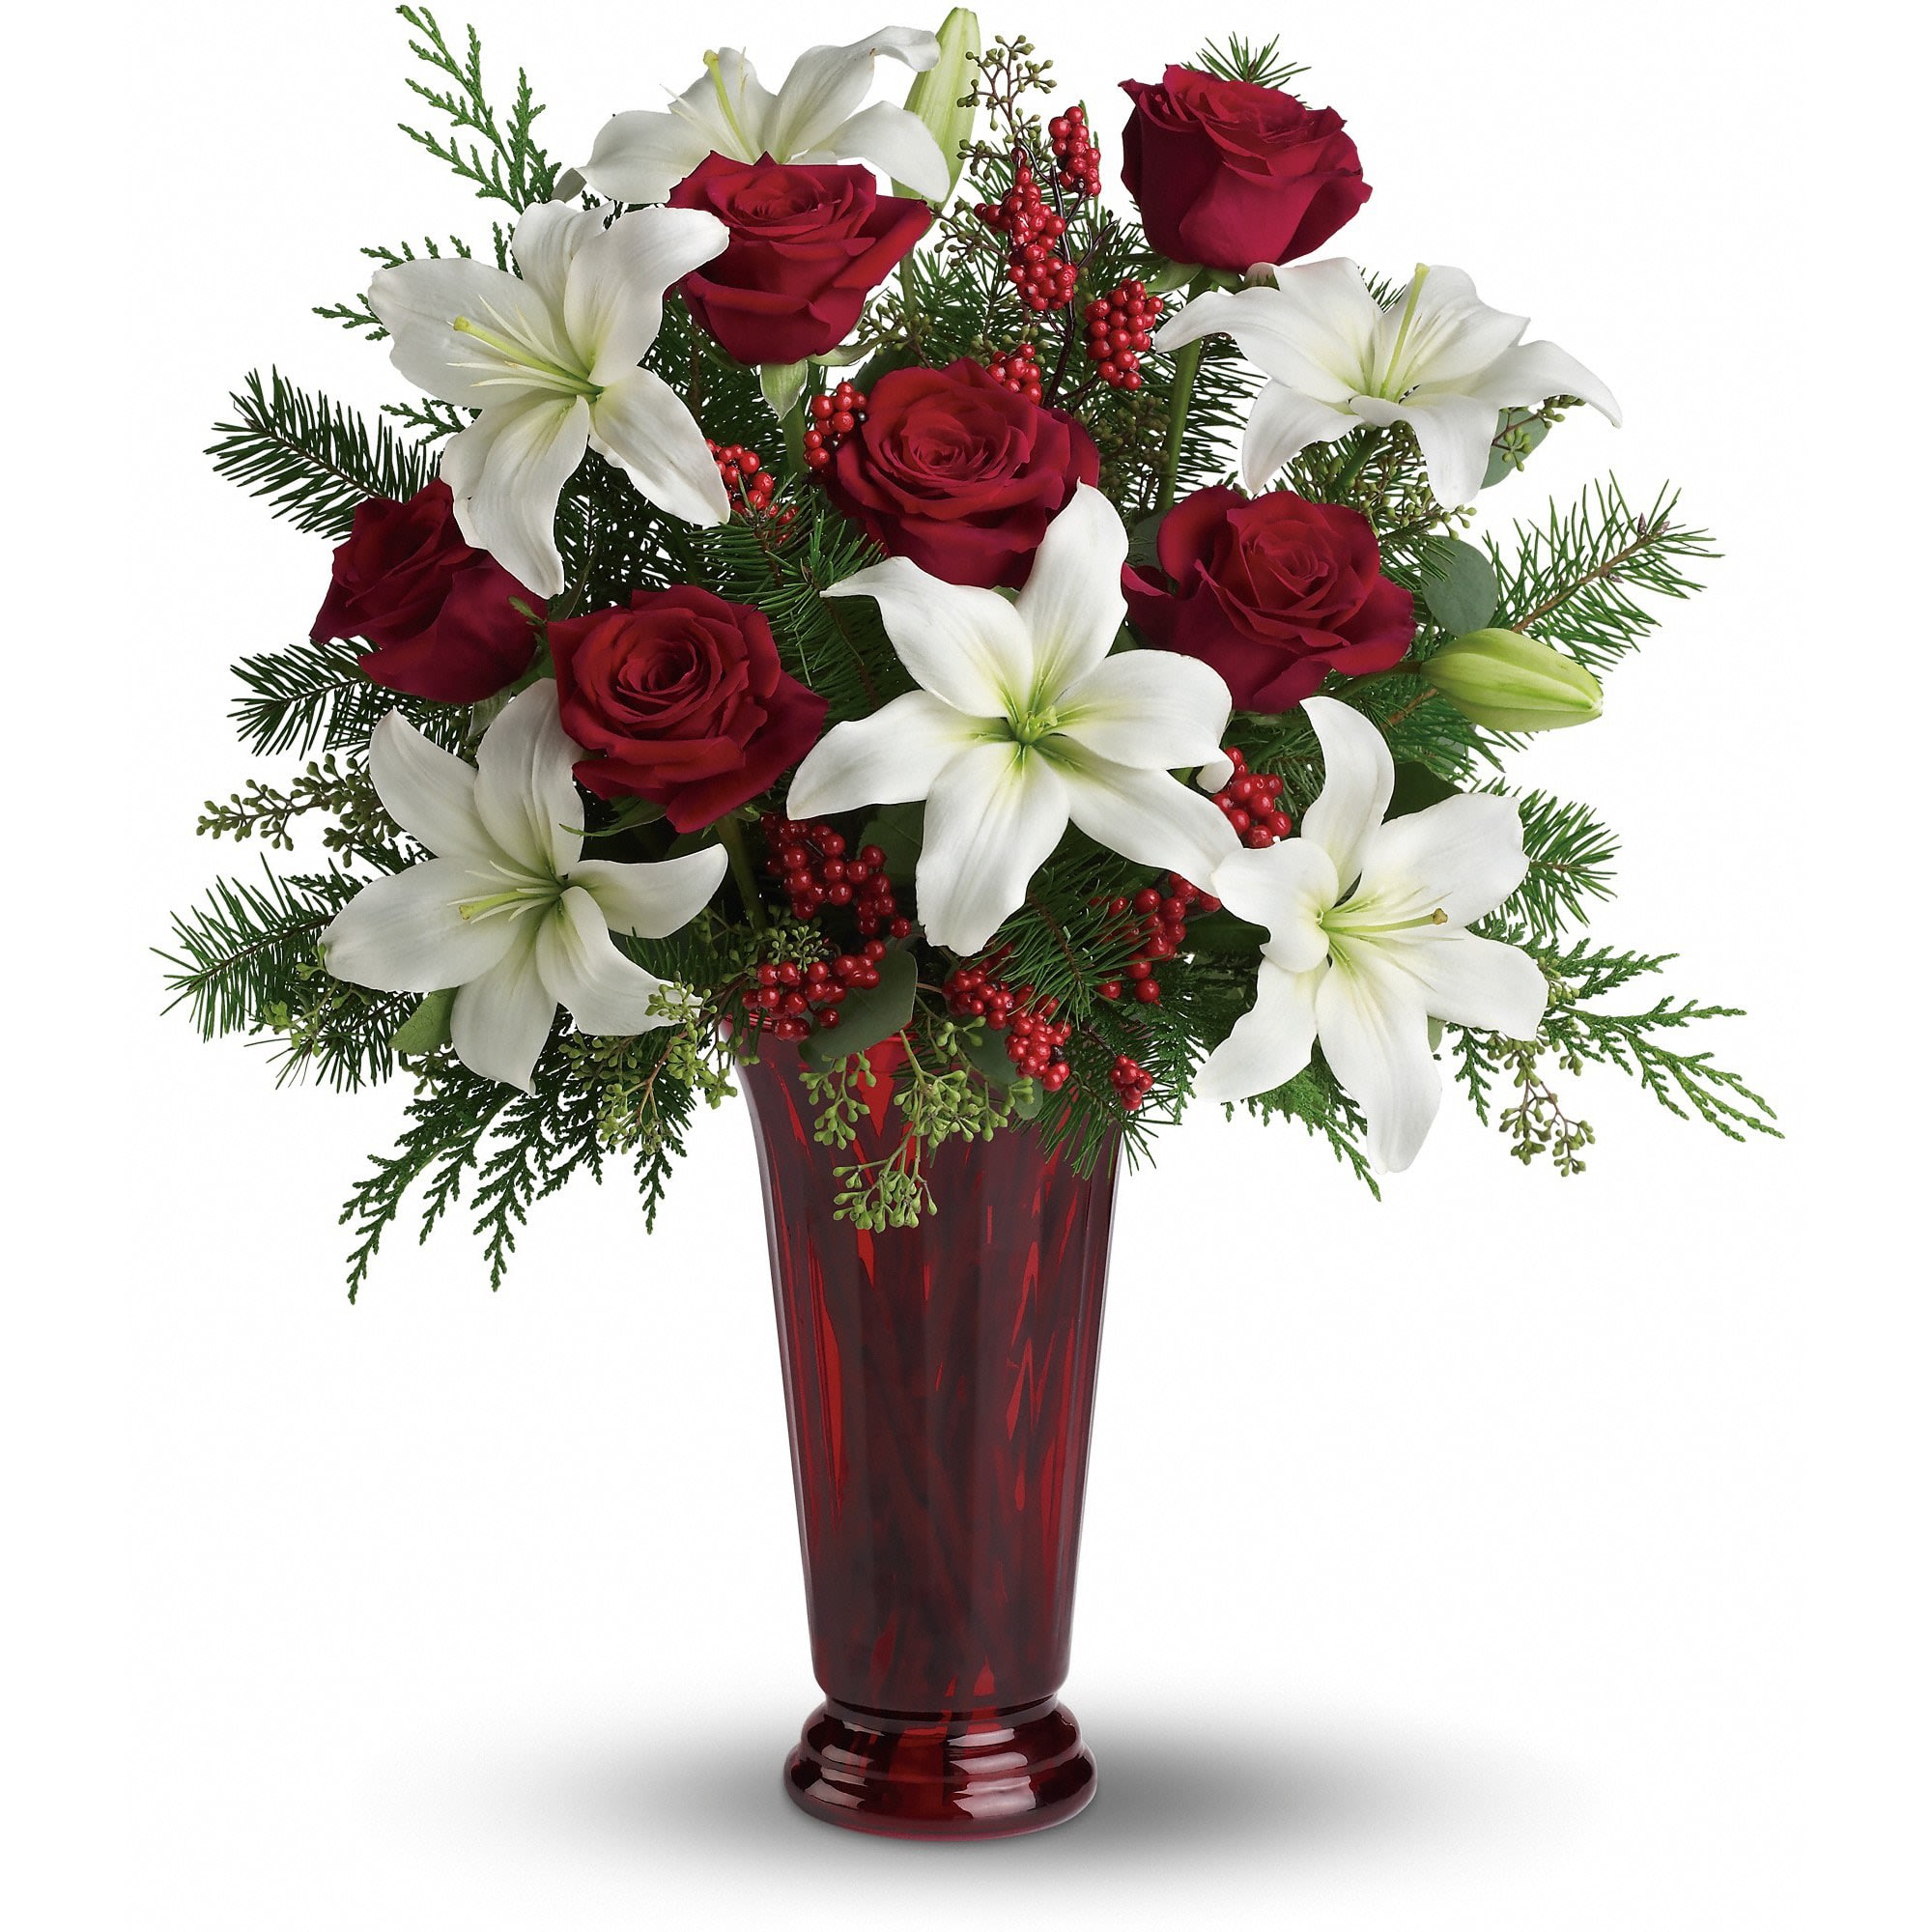 Holiday Magic  - With beautiful red roses and brilliant white lilies delivered in a dramatic tall ruby vase, this dazzling holiday arrangement casts an enchanting spell. A step up from the traditional, its effect is nothing less than magical.    White asiatic lilies, red roses, fir, cedar and eucalyptus create the perfect holiday bouquet, especially when delivered in a stunning ruby red roman column vase.    Approximately 20&quot; W x 22 1/2&quot; H    Orientation: One-Sided        As Shown : T117-1A      Deluxe : T117-1B      Premium : T117-1C    